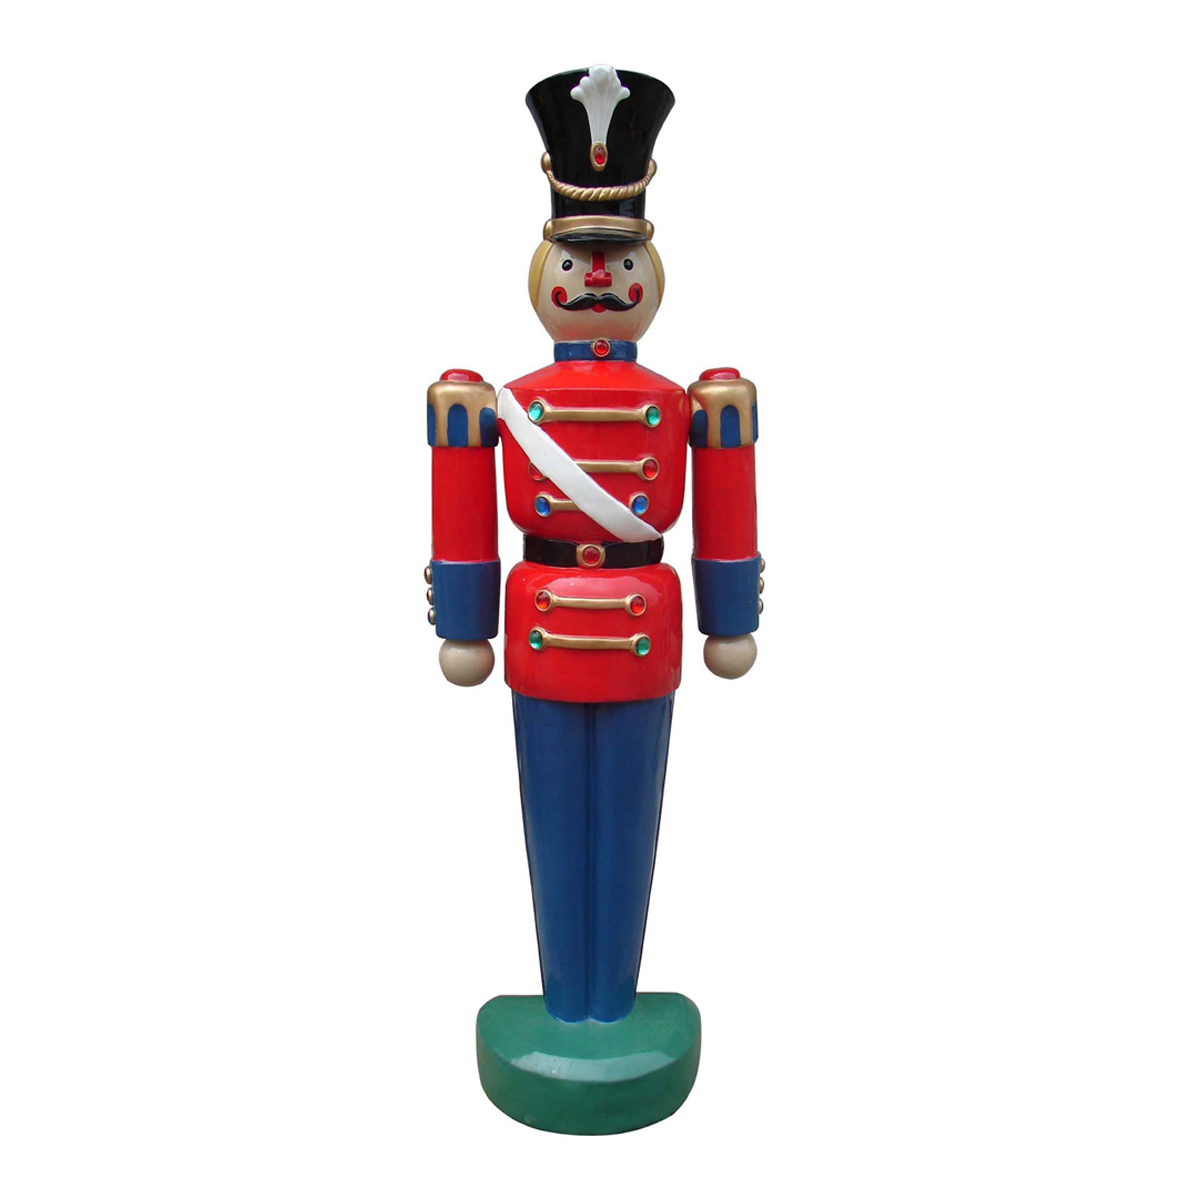 Half Toy Soldier with Jewels